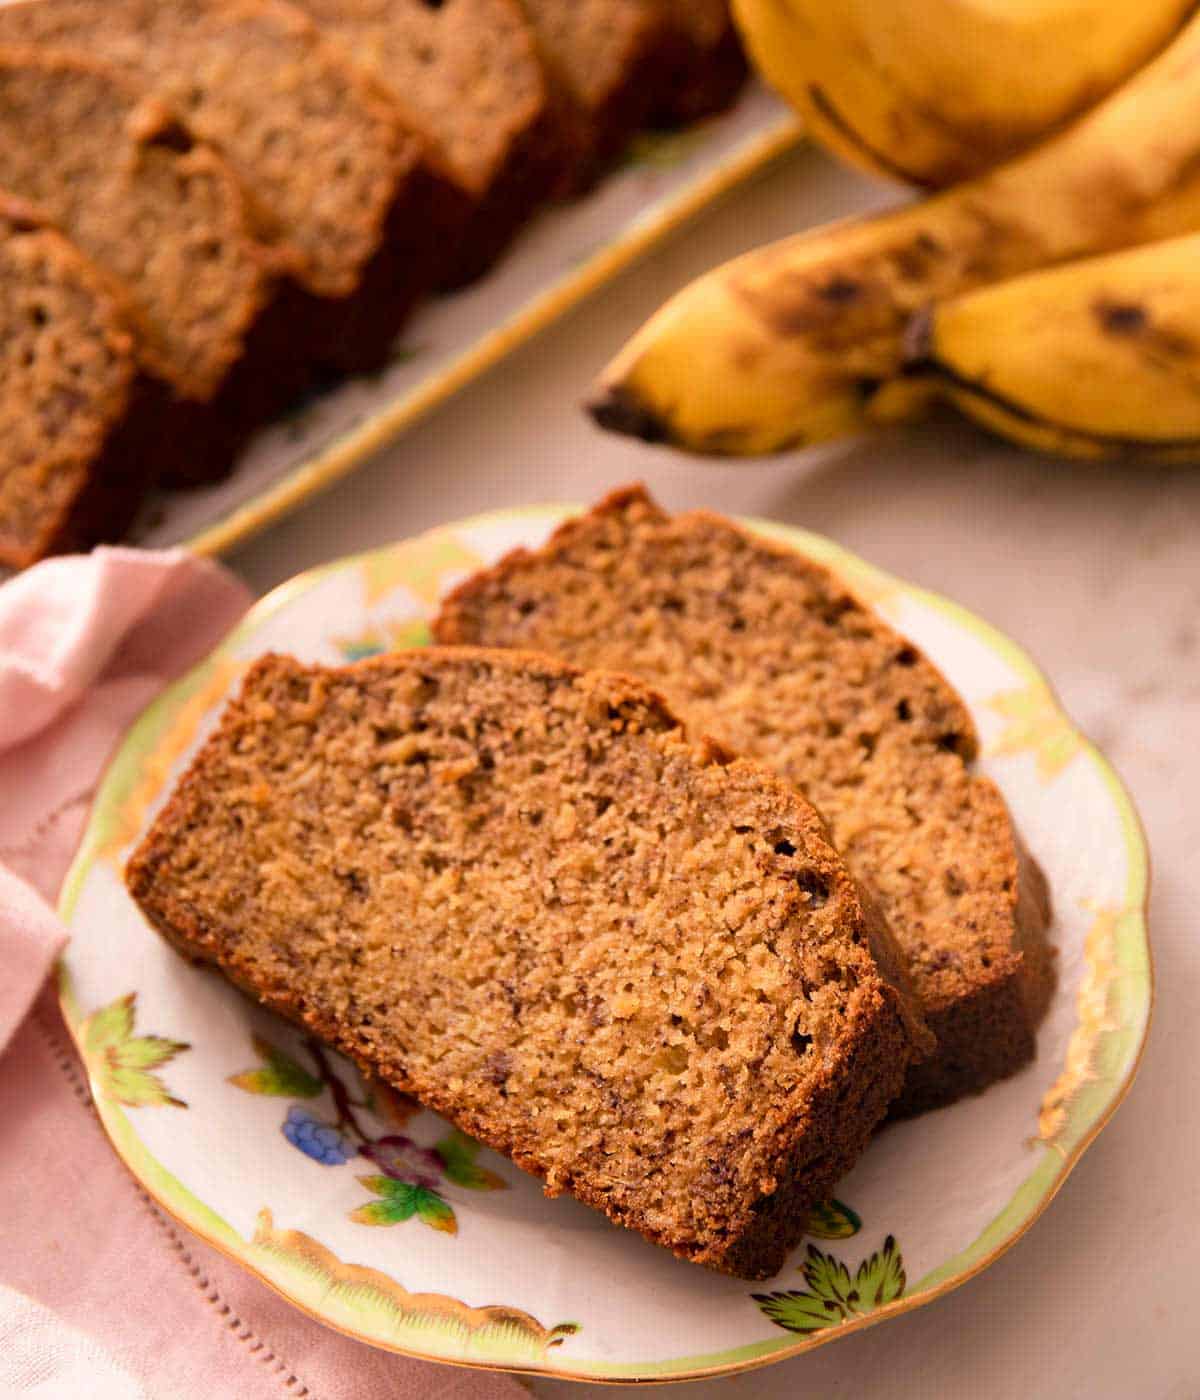 Two slices of banana bread on a plate